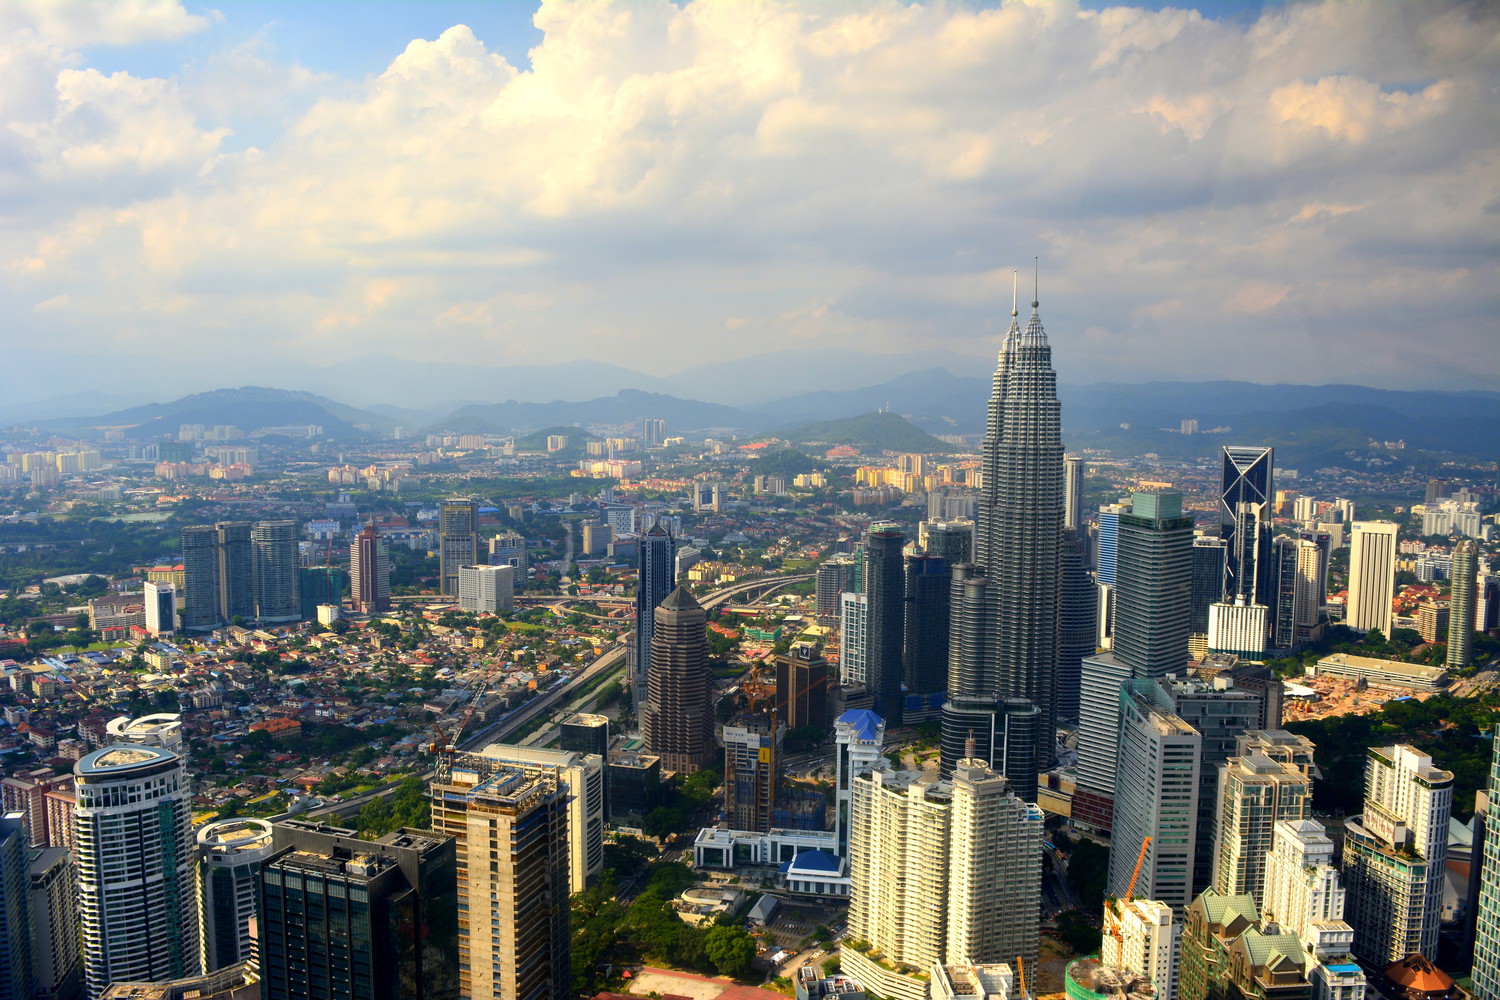 Petronas Twin Towers and other tall buildings as seen from Atmosphere 360, a revolving restaurant situated 282 metres (948 feet) above the ground level